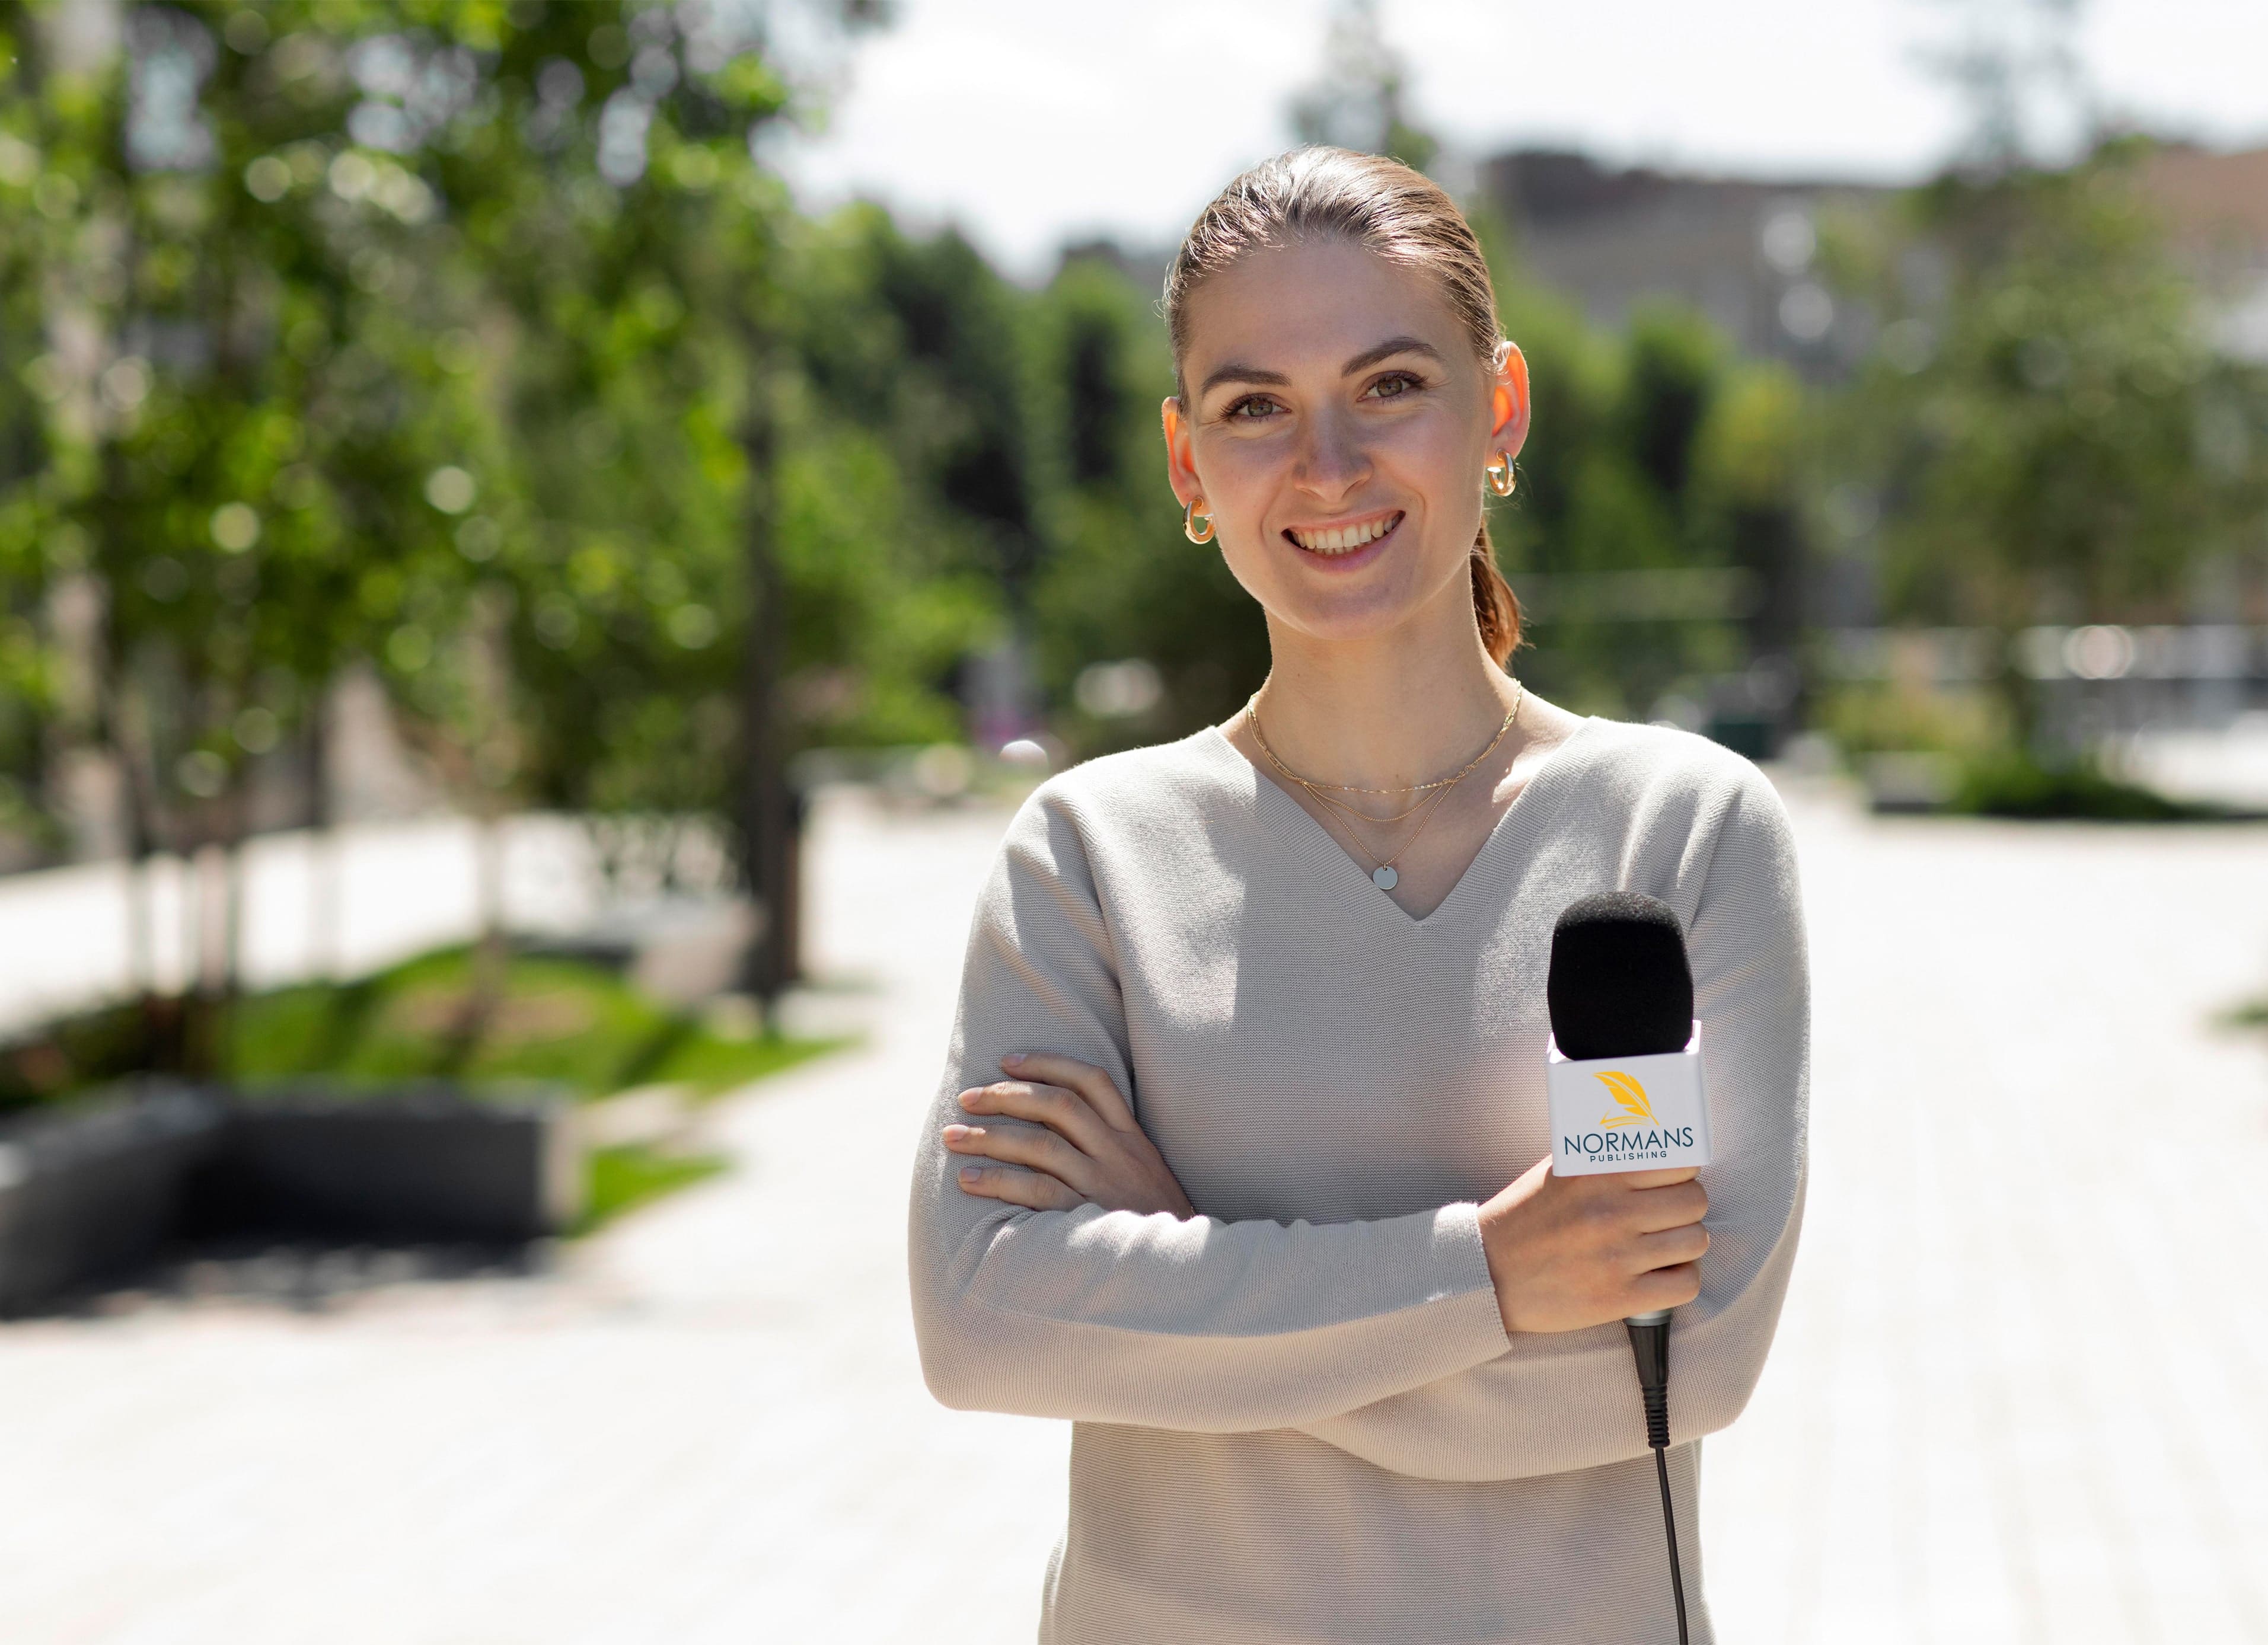 A woman confidently holds a microphone, standing in front of a majestic building.